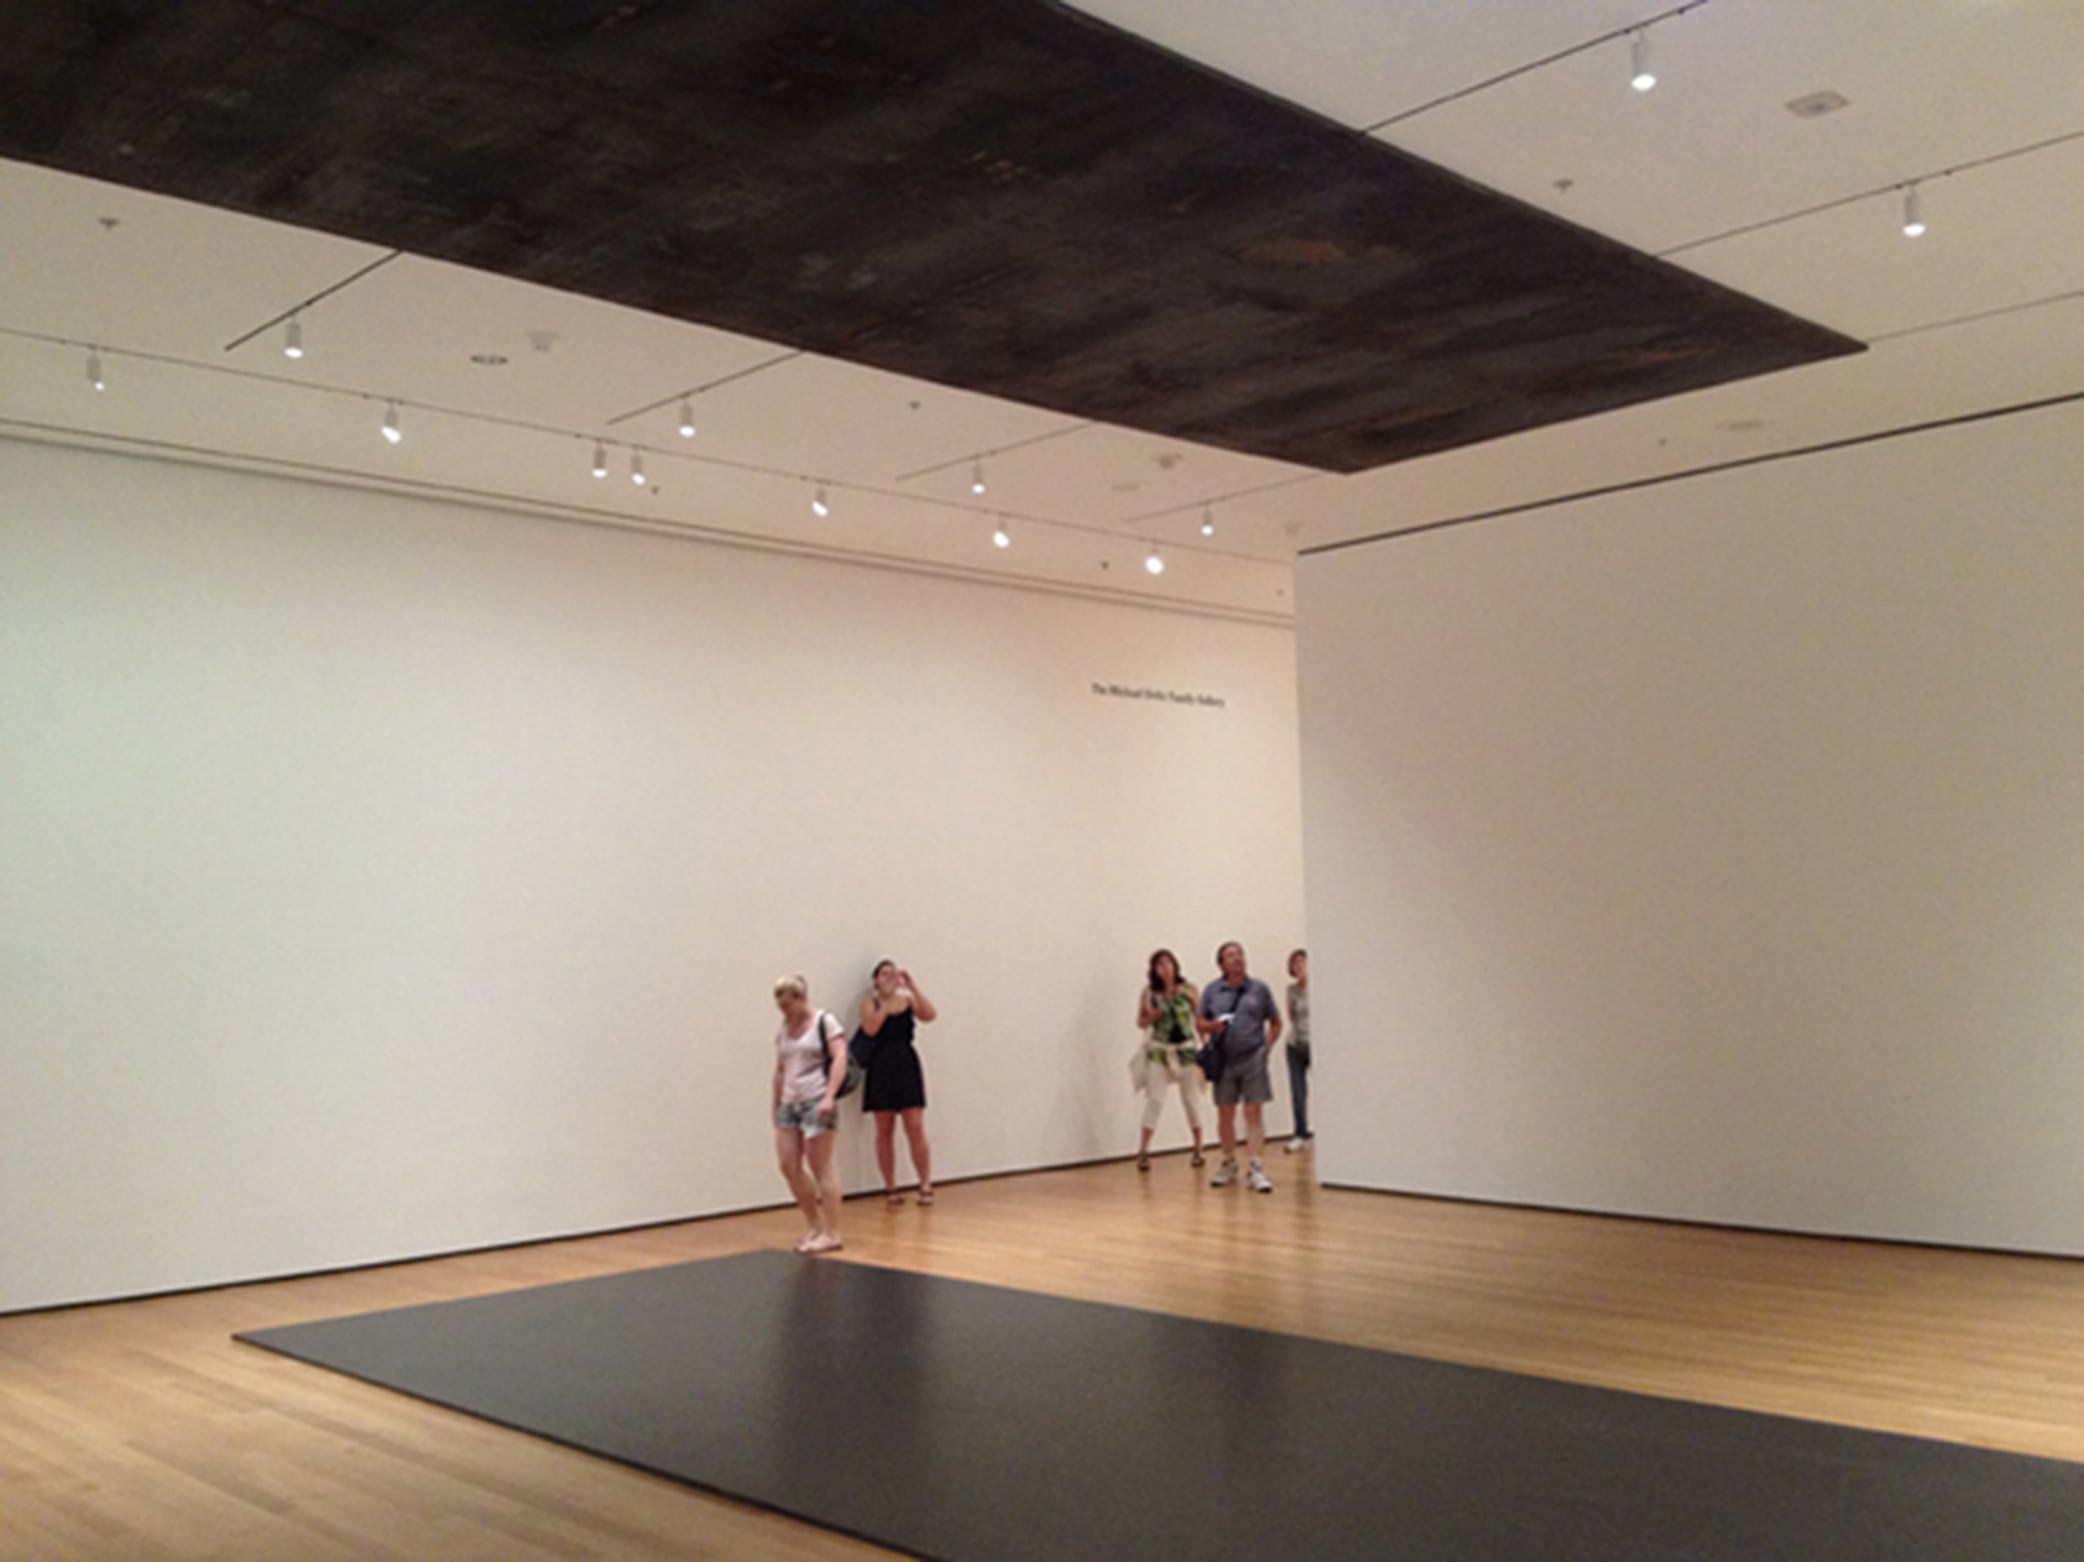 Richard Serra. Delineator. 1974-75. Installation view on fourth floor of MoMA’s Painting and Sculpture Galleries